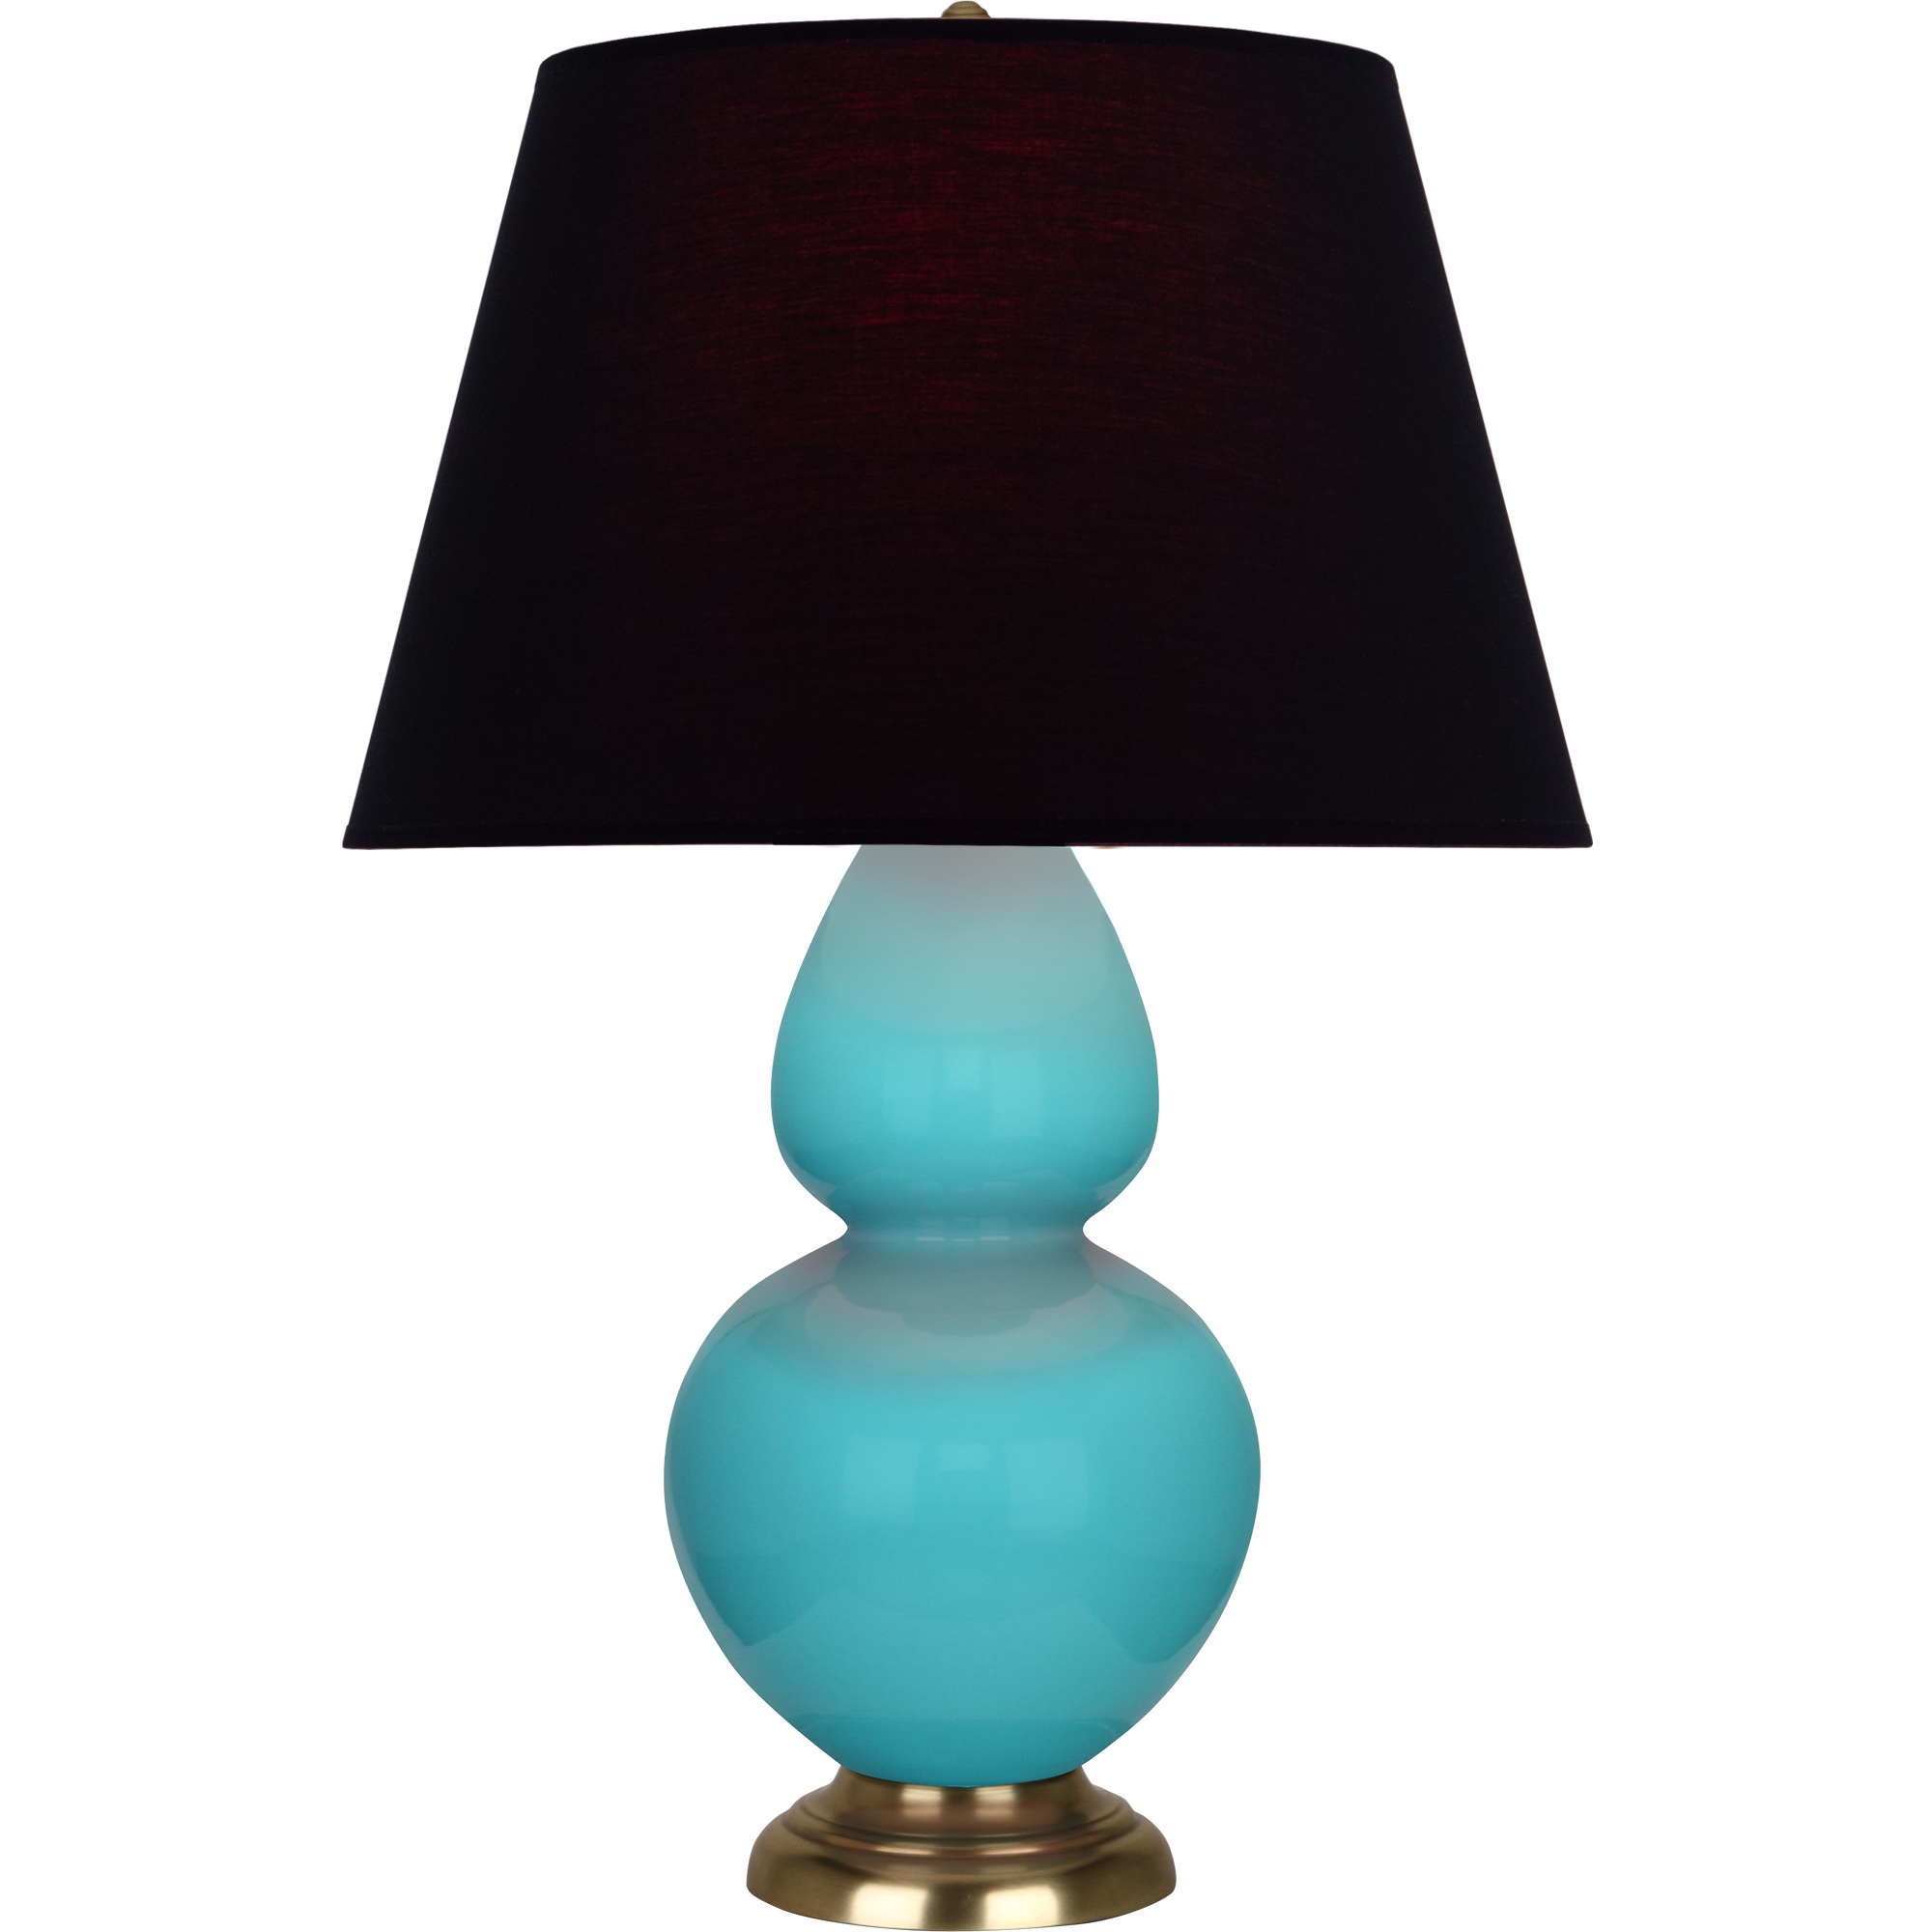 Double Gourd Table Lamp Style #1740K